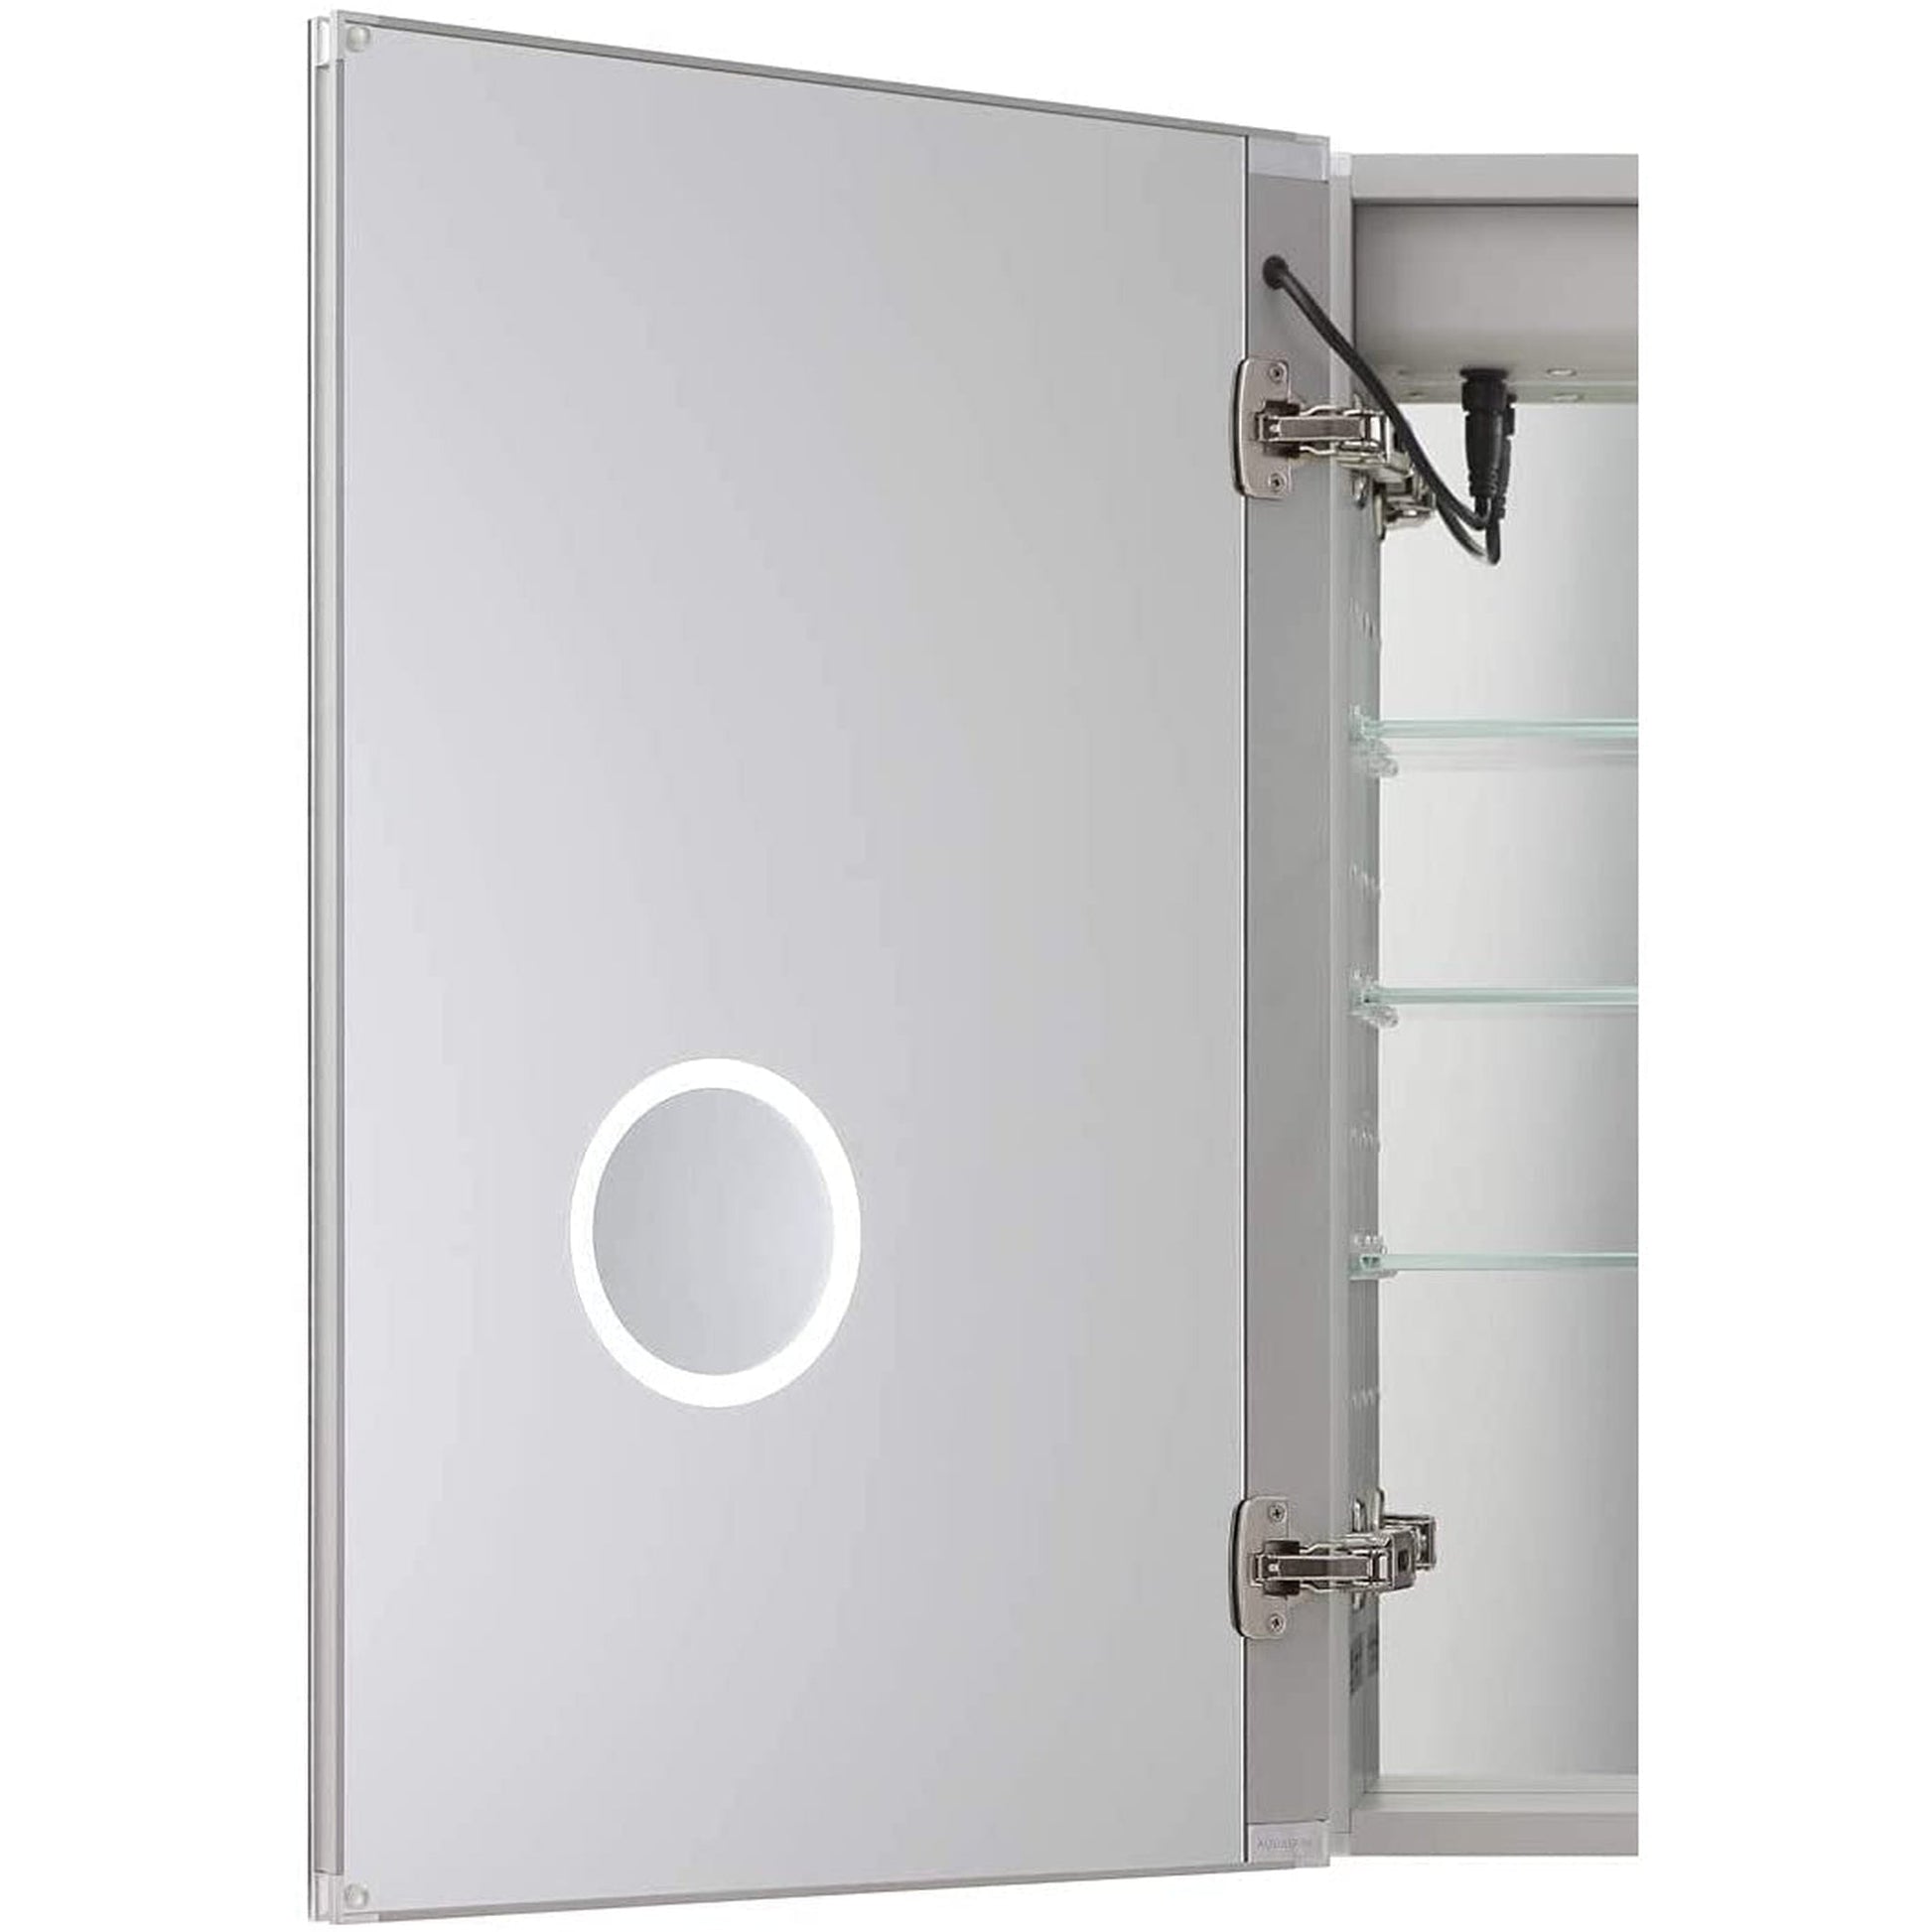 Aquadom Royale Plus 40" x 36" Rectangle Recessed or Surface Mount Bi-View LED Lighted Bathroom Medicine Cabinet With Defogger, Electrical Outlet, Magnifying Mirror